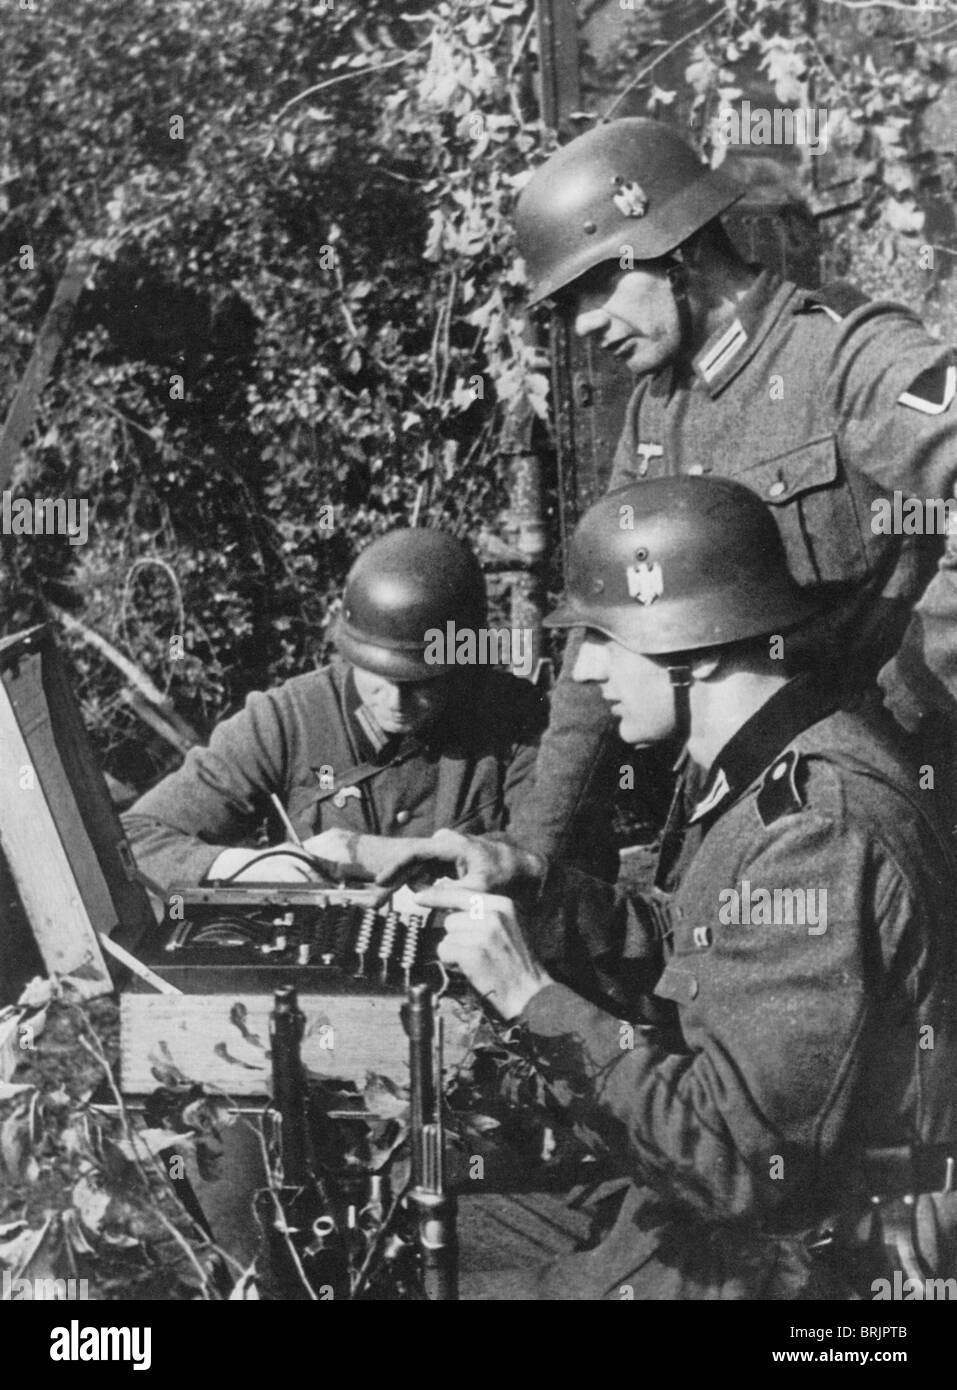 ENIGMA  MACHINE  in use by Germany army during WW2 Stock Photo